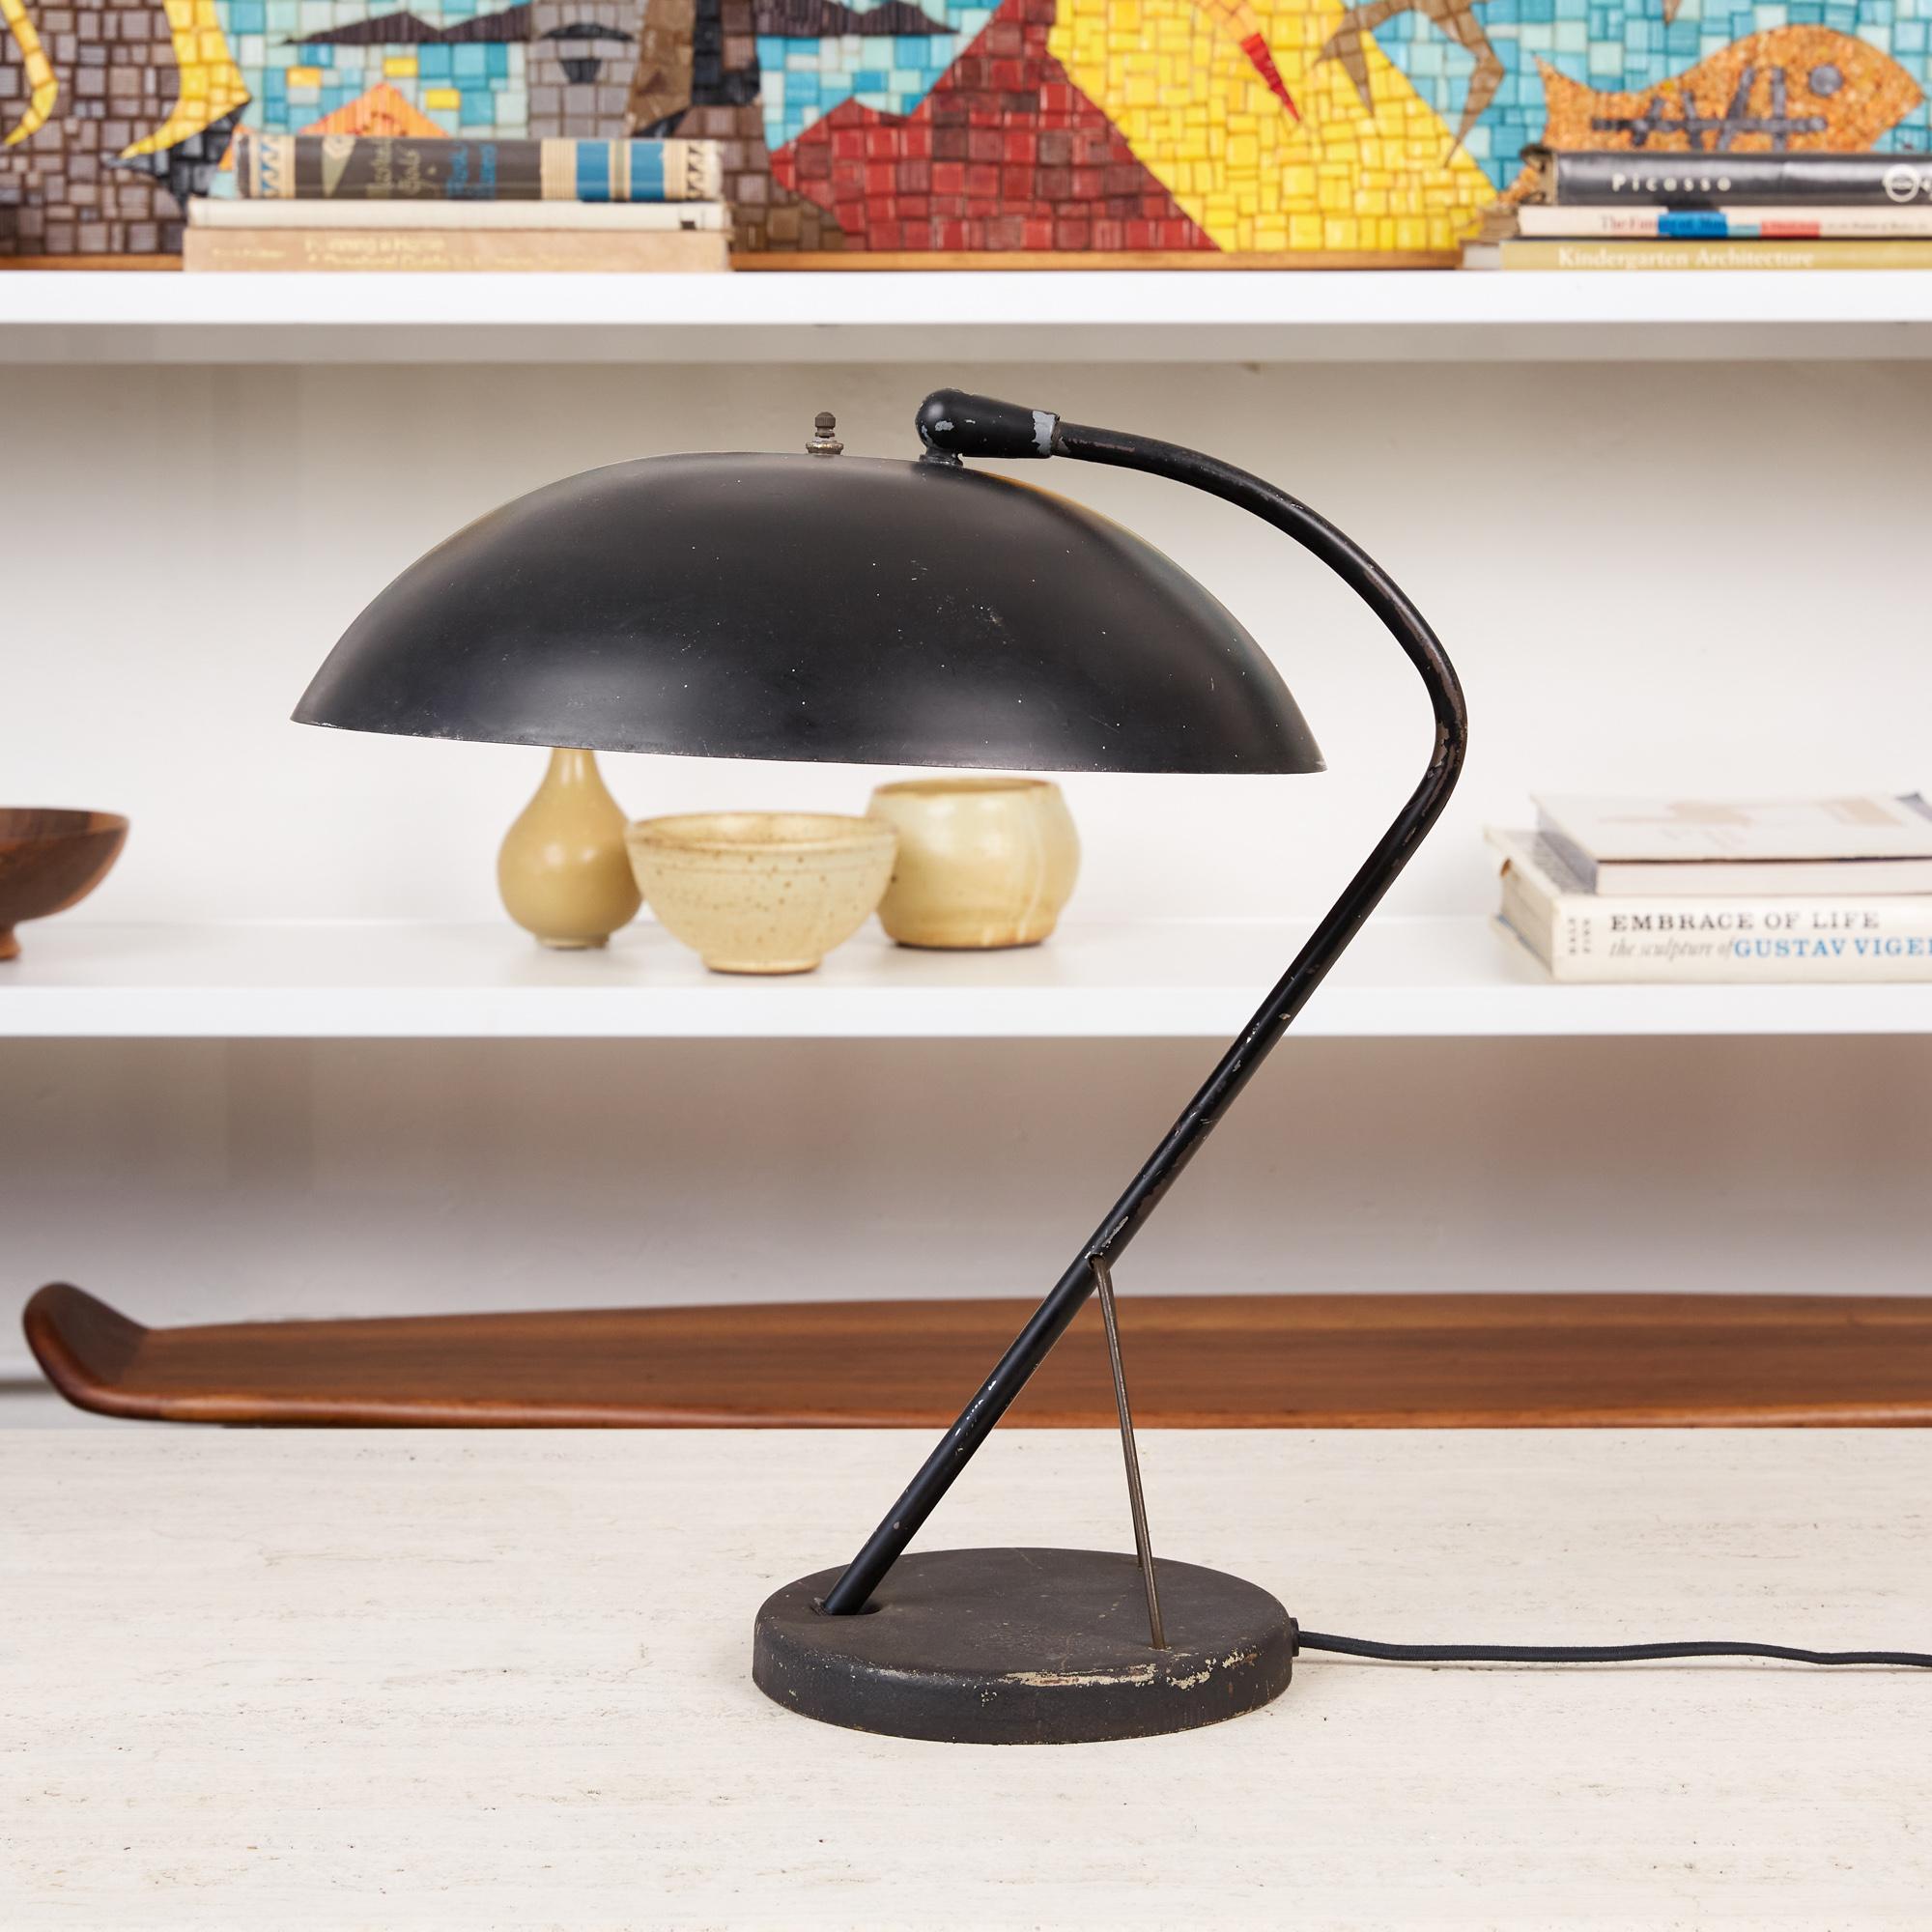 Kurt Versen desk lamp, USA, circa 1950s. This table lamp by Modernist American lighting designer Kurt Versen is one of his more rare and desirable designs. It features a Minimalist enameled black steel body and shade. The dome shaped shade is